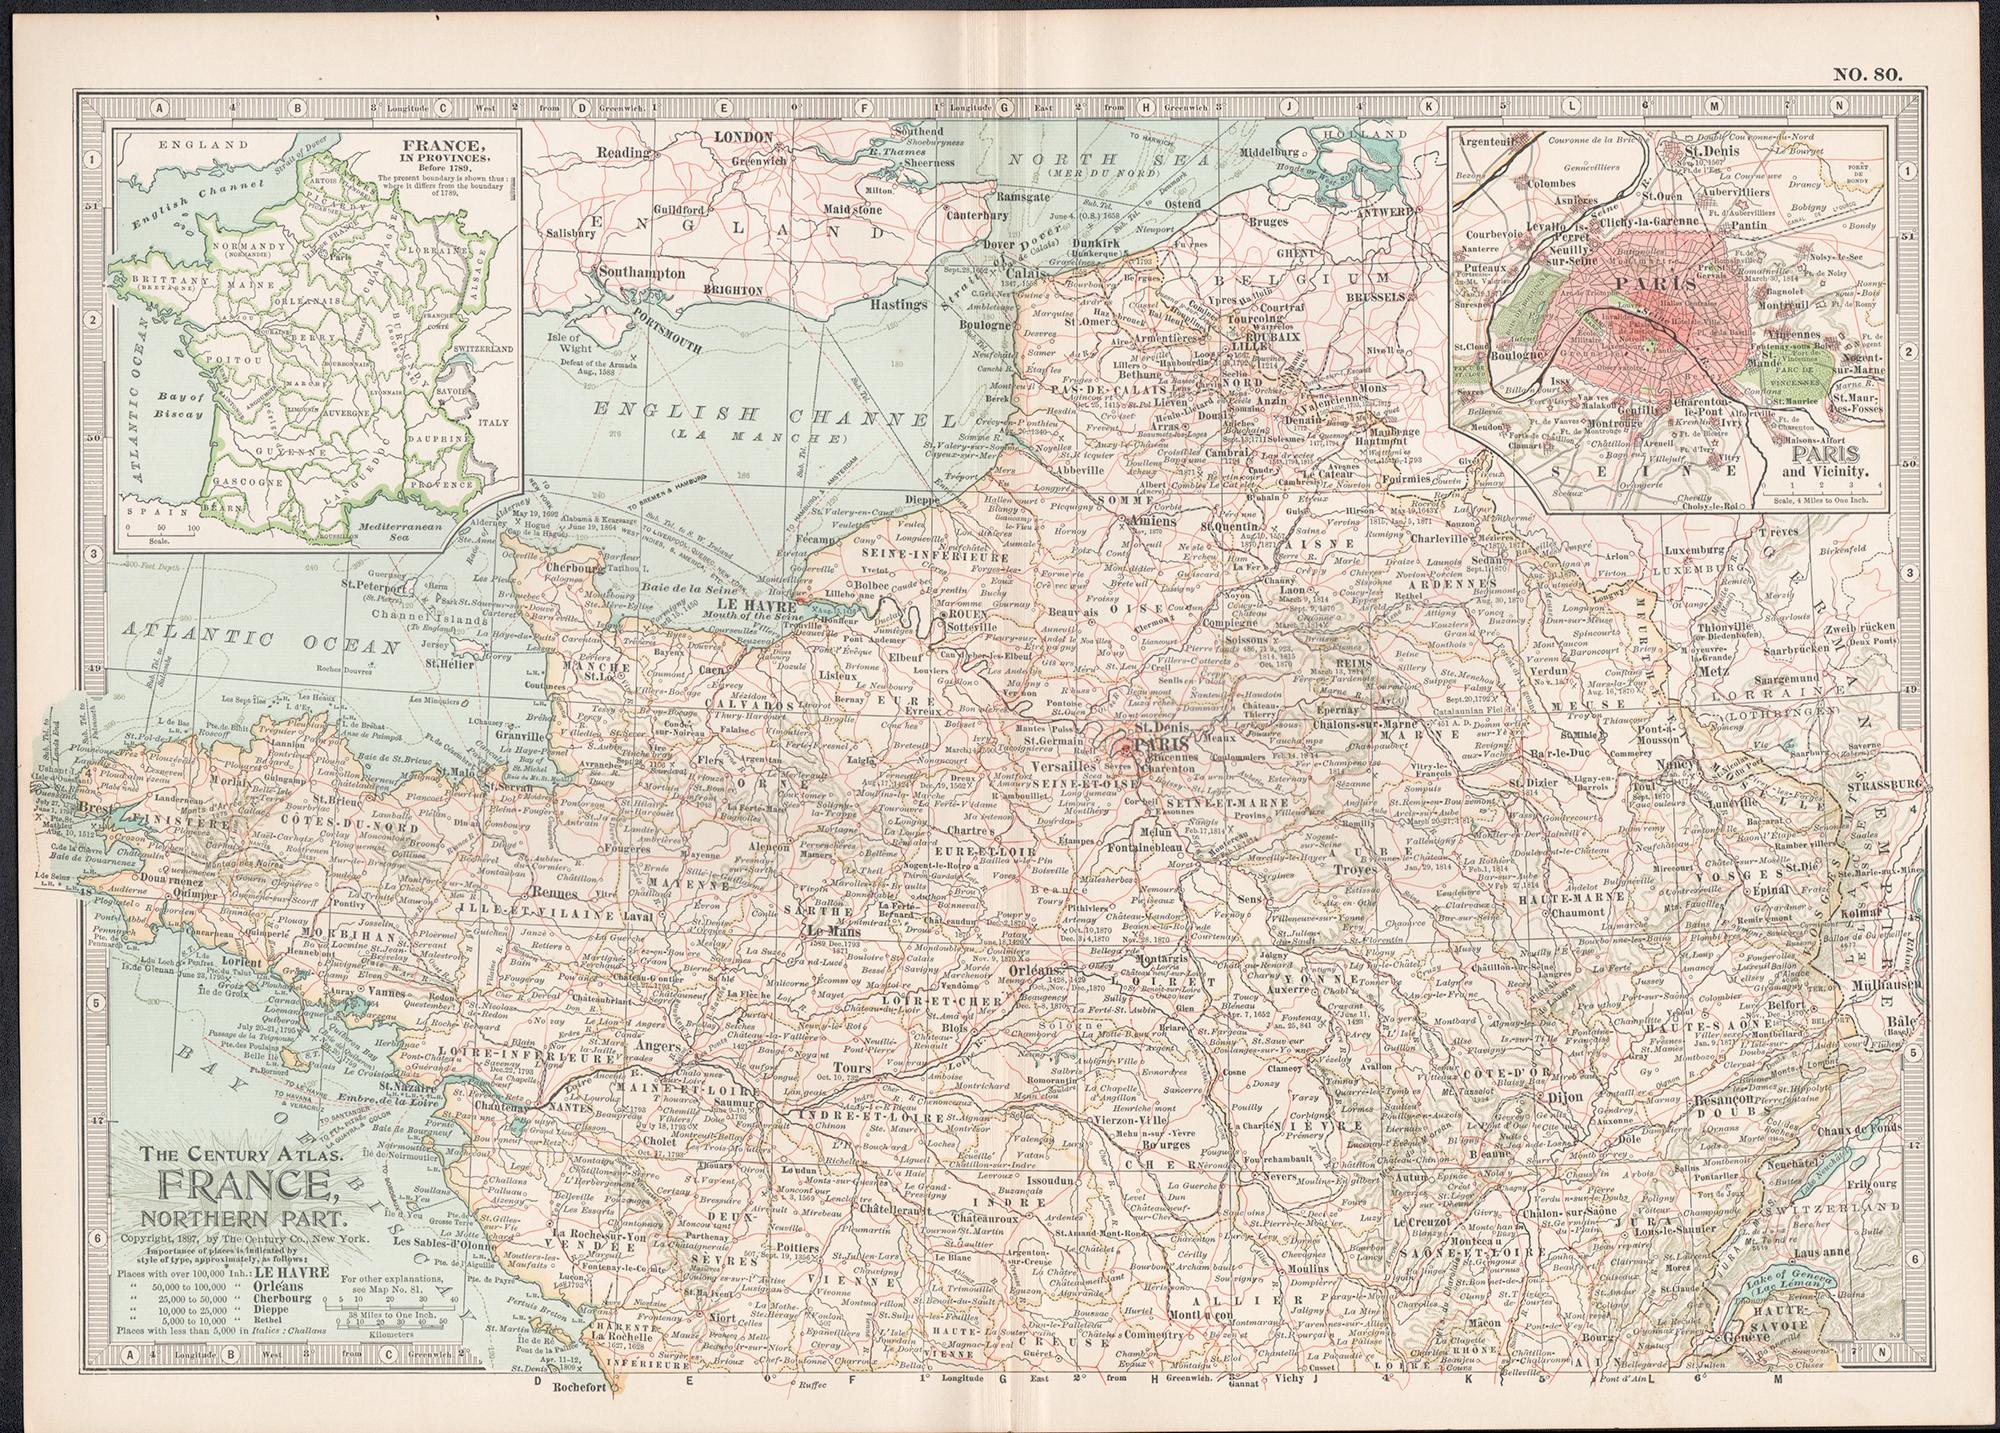 France, Northern Part. Century Atlas antique map - Print by Unknown